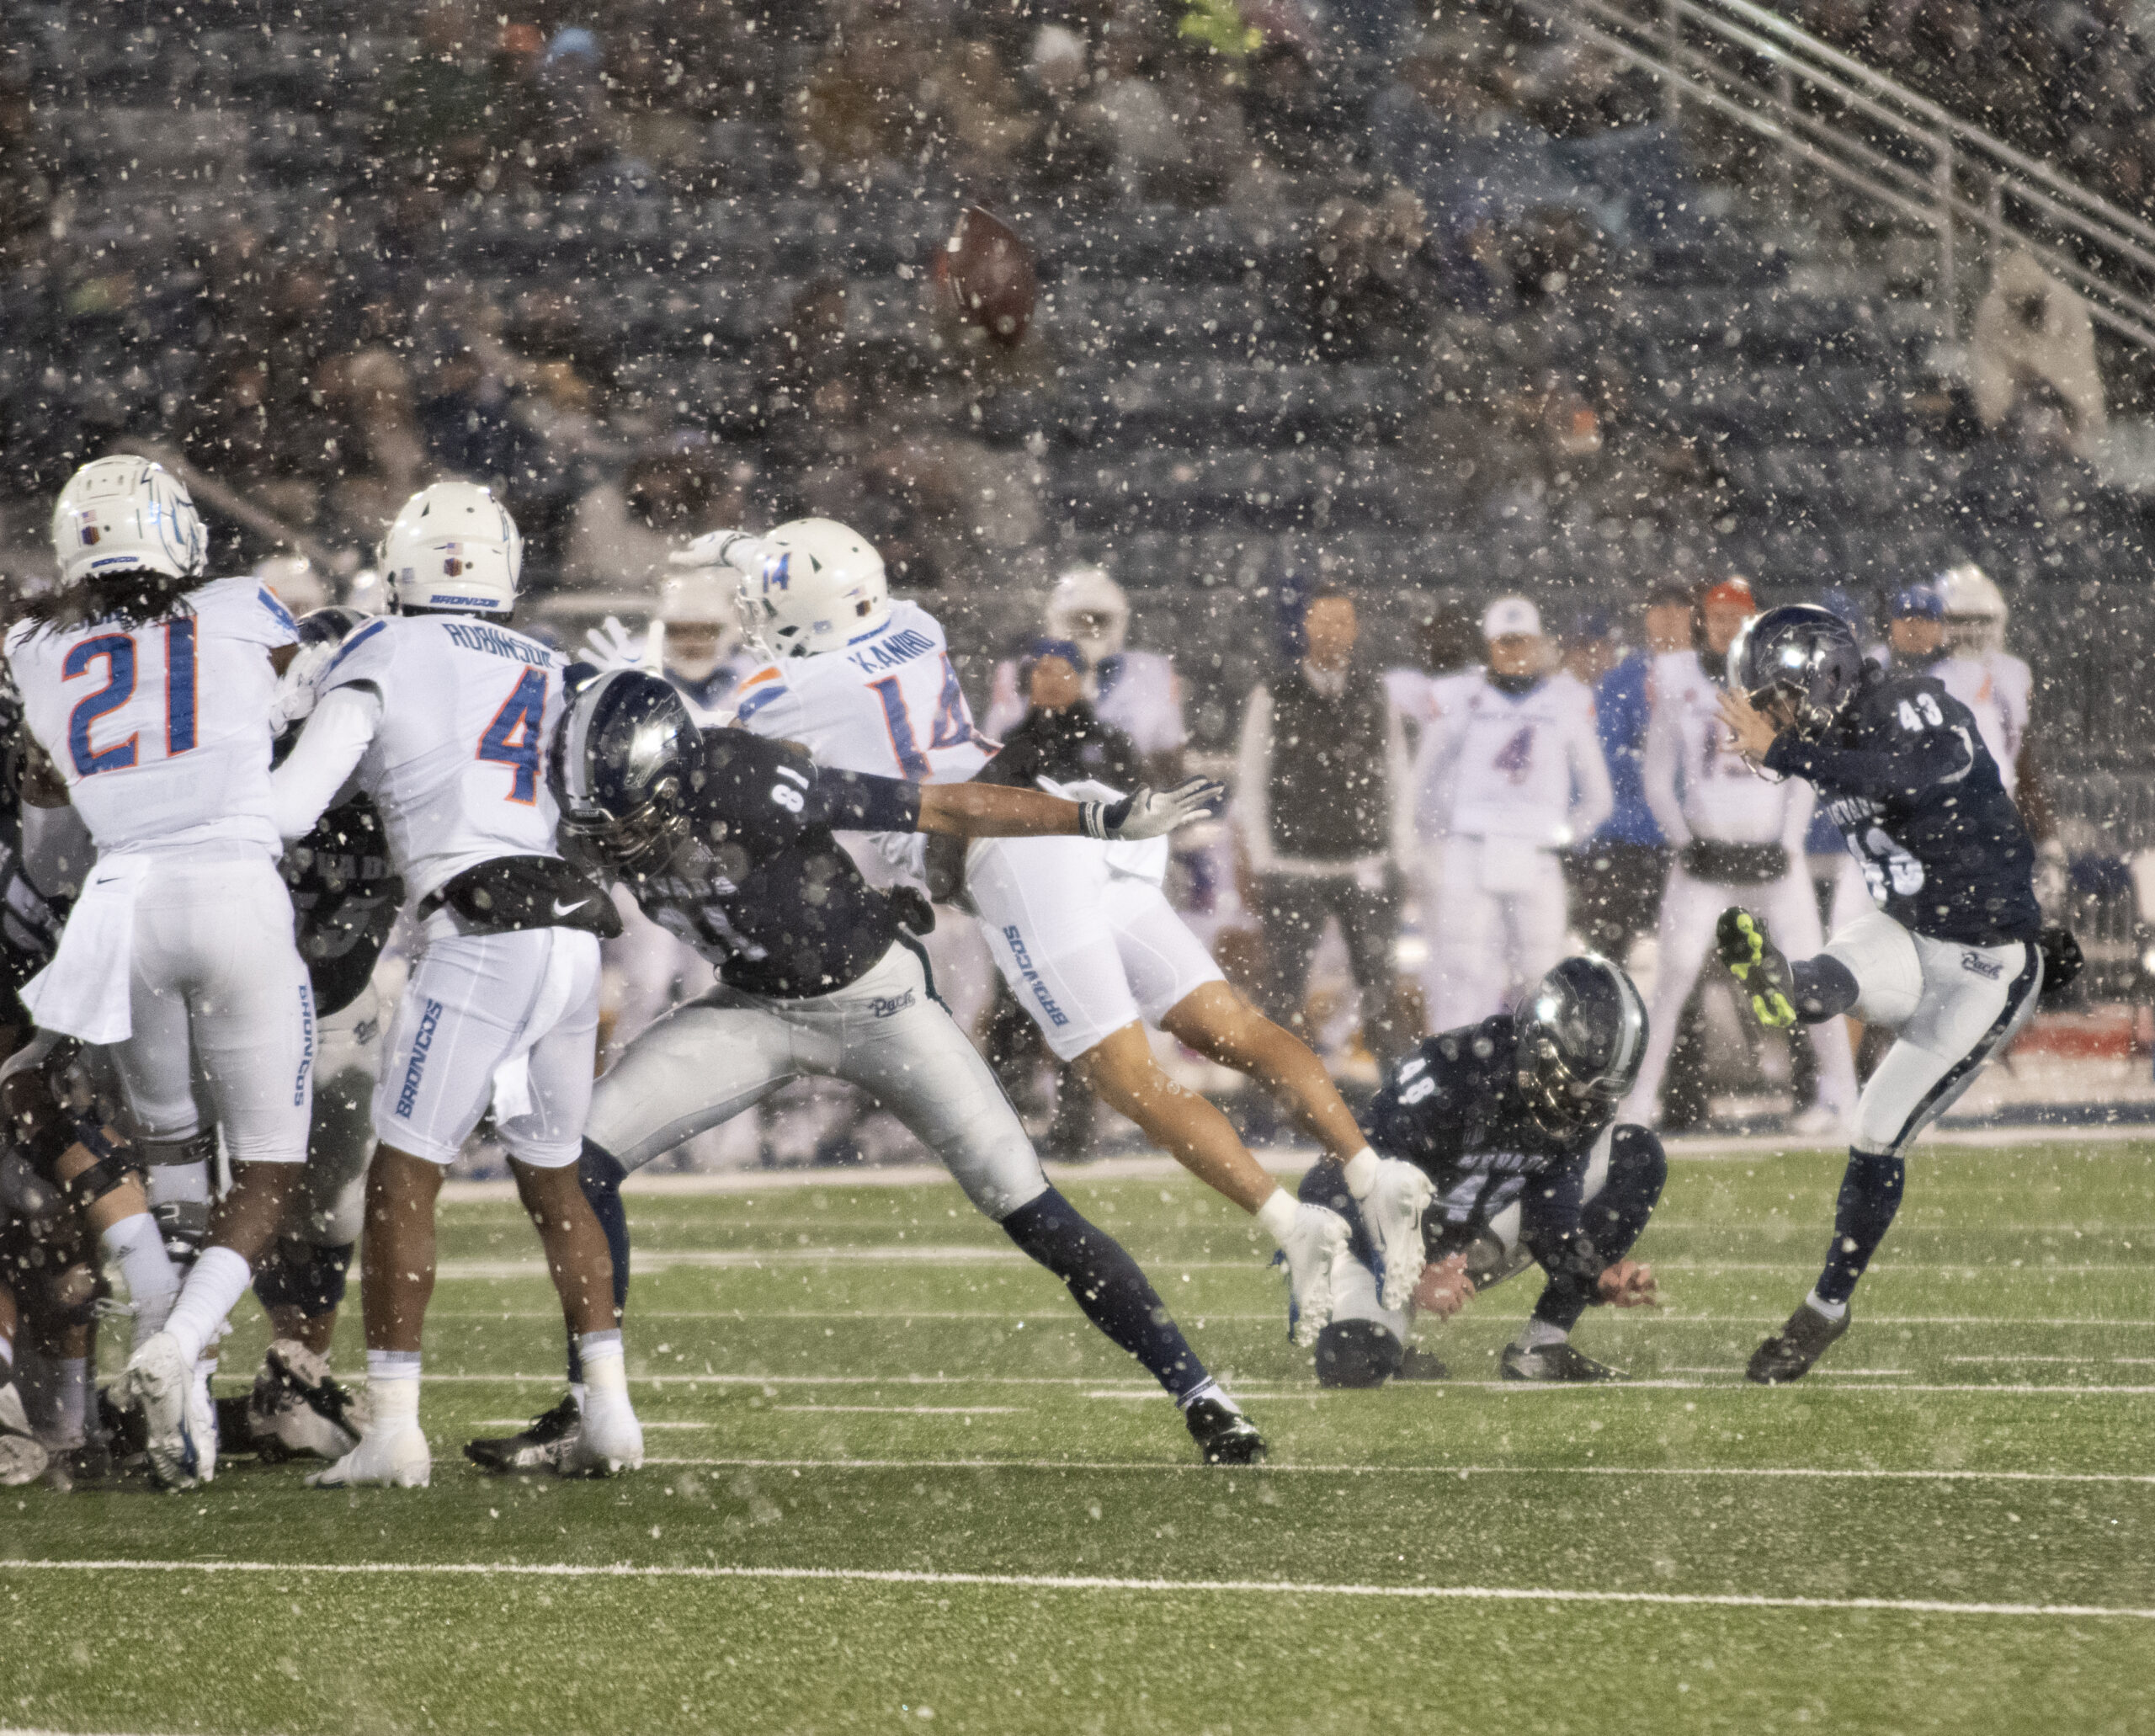 Nevada shut down by Boise State Broncos, losing 41-3 in the snow